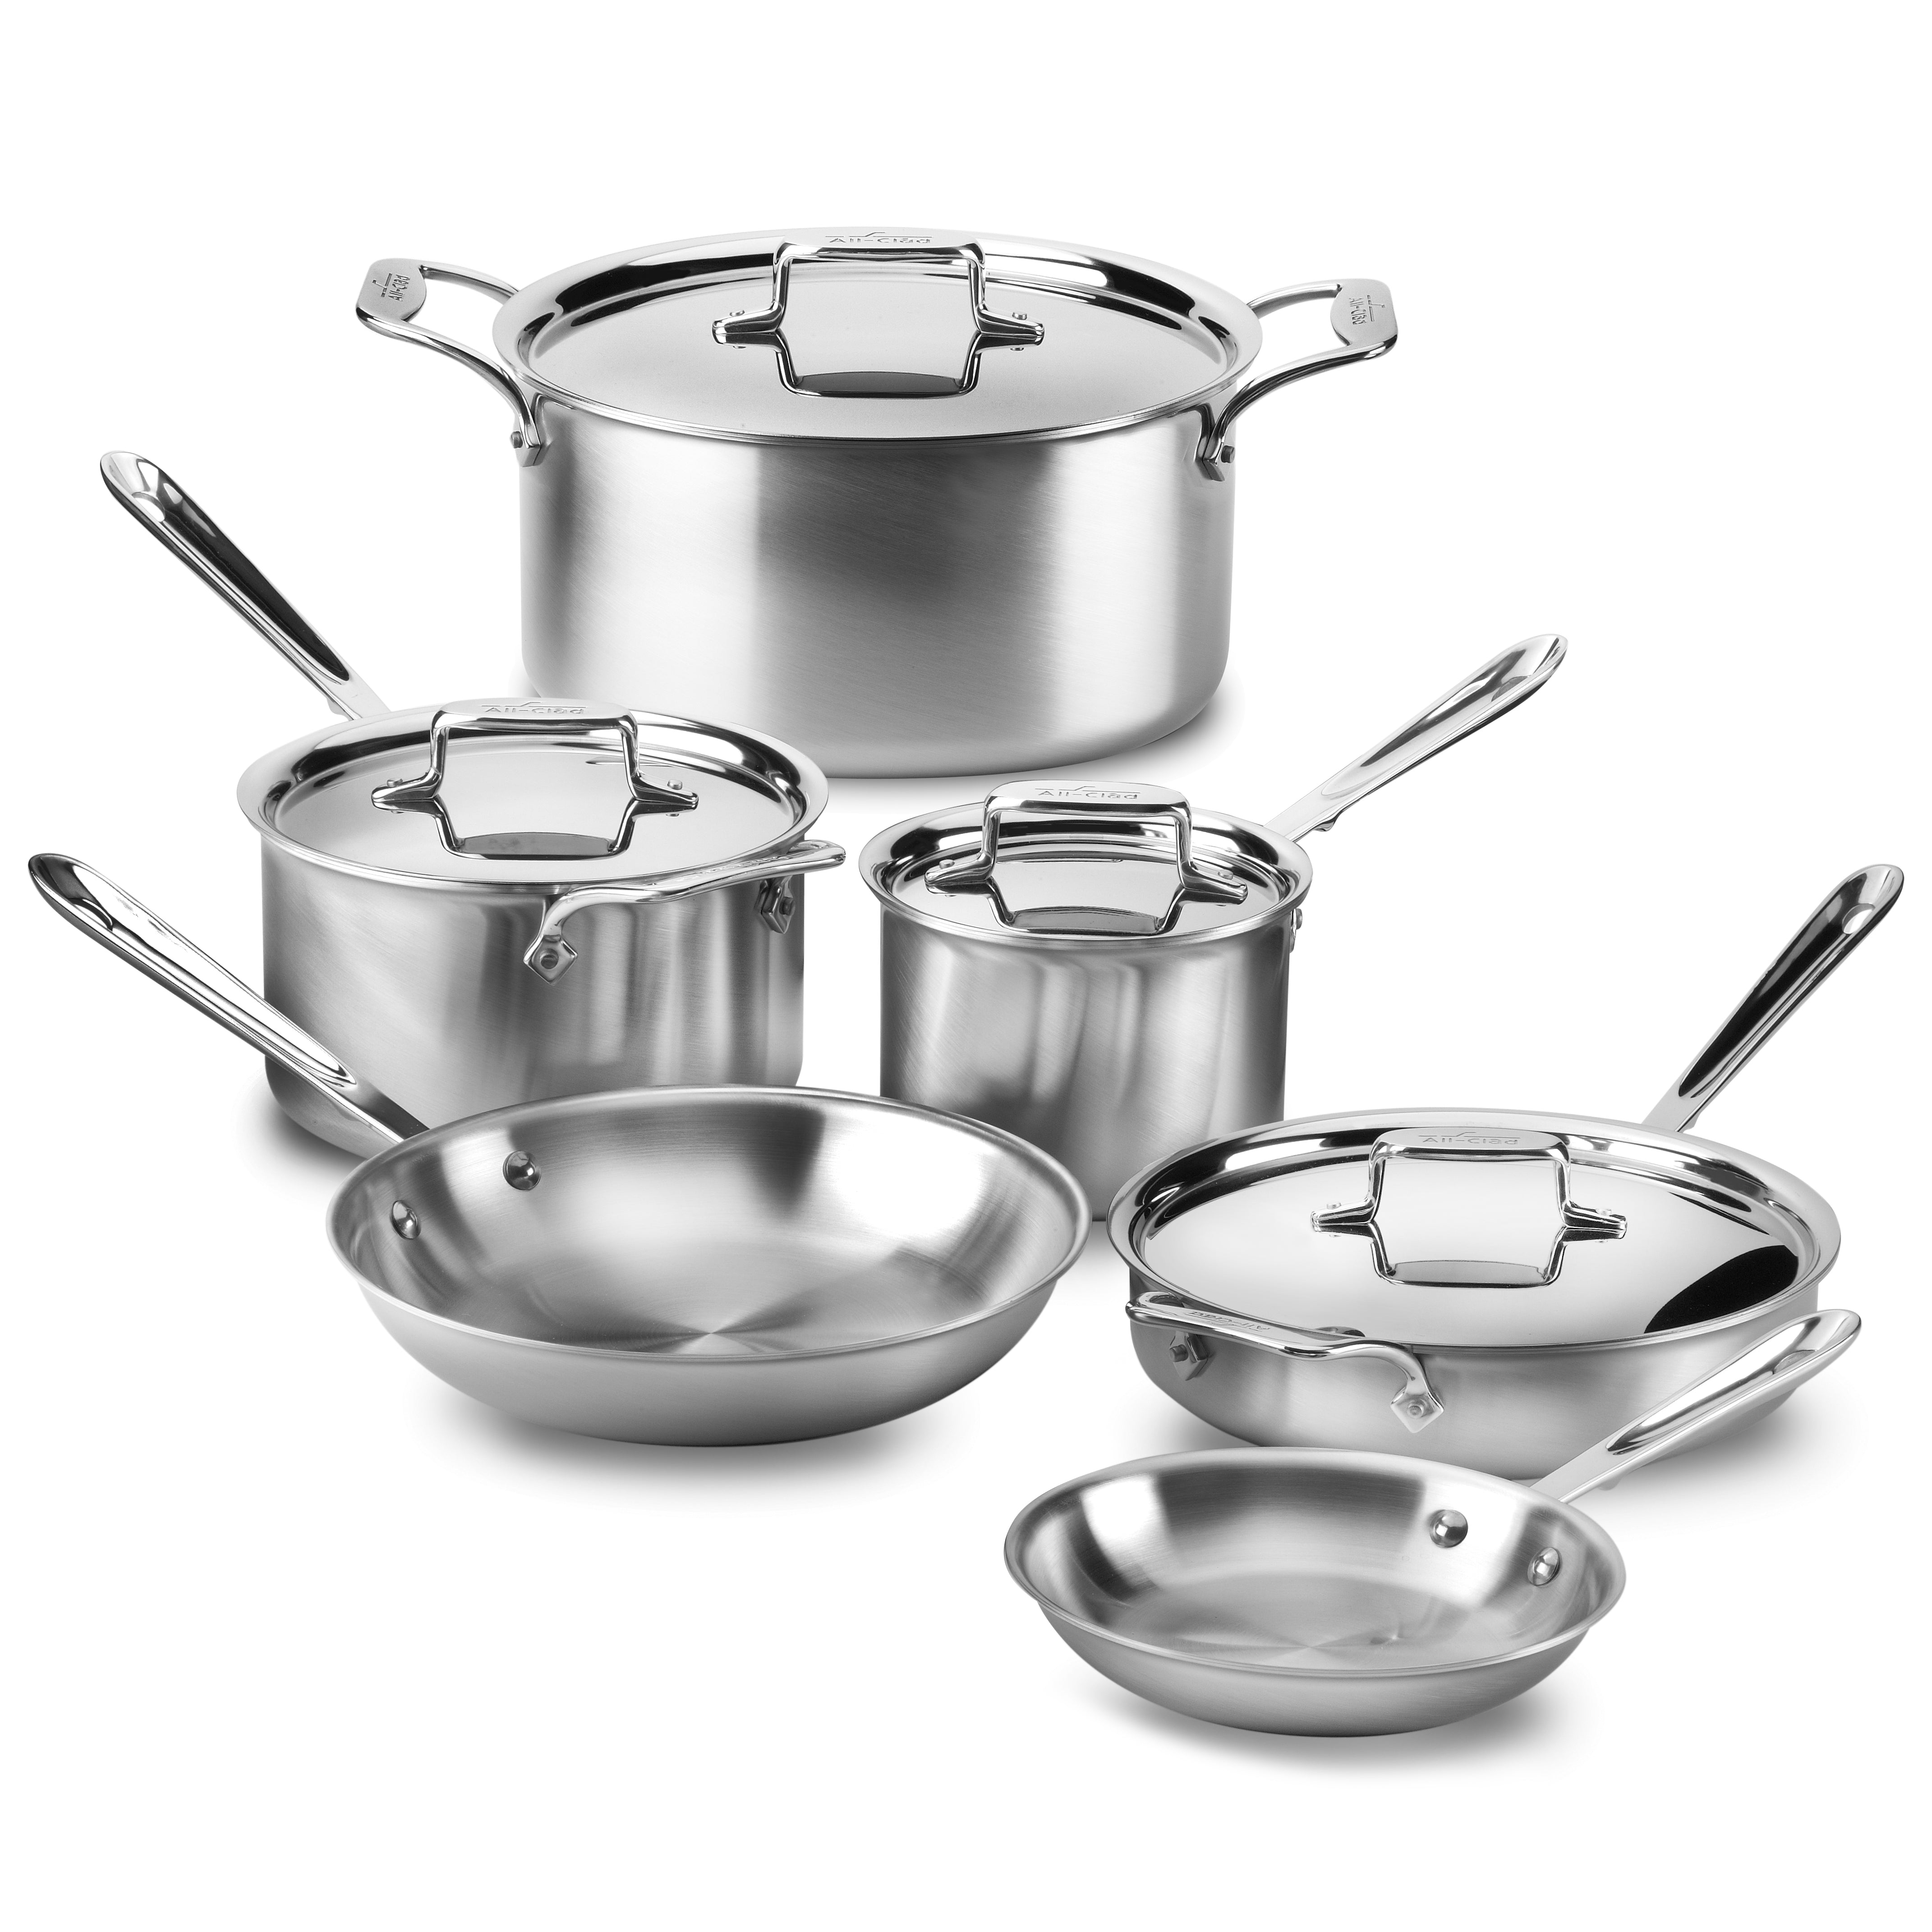 D5 - 5-ply Bonded Stainless Steel Cookware Set